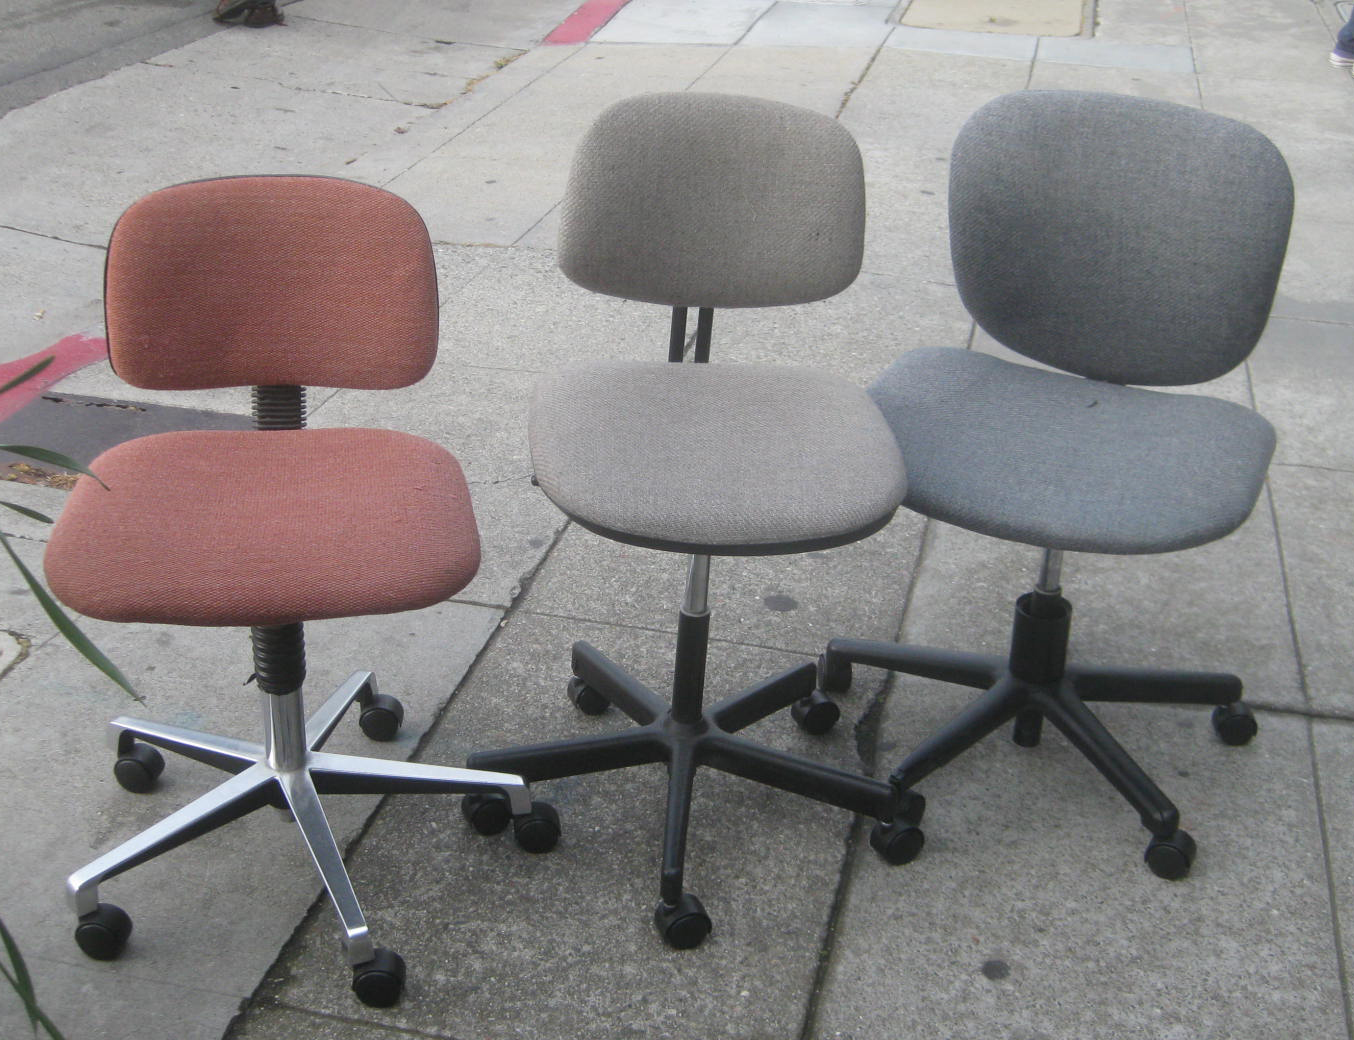 UHURU FURNITURE & COLLECTIBLES SOLD Task Chairs 1520 each